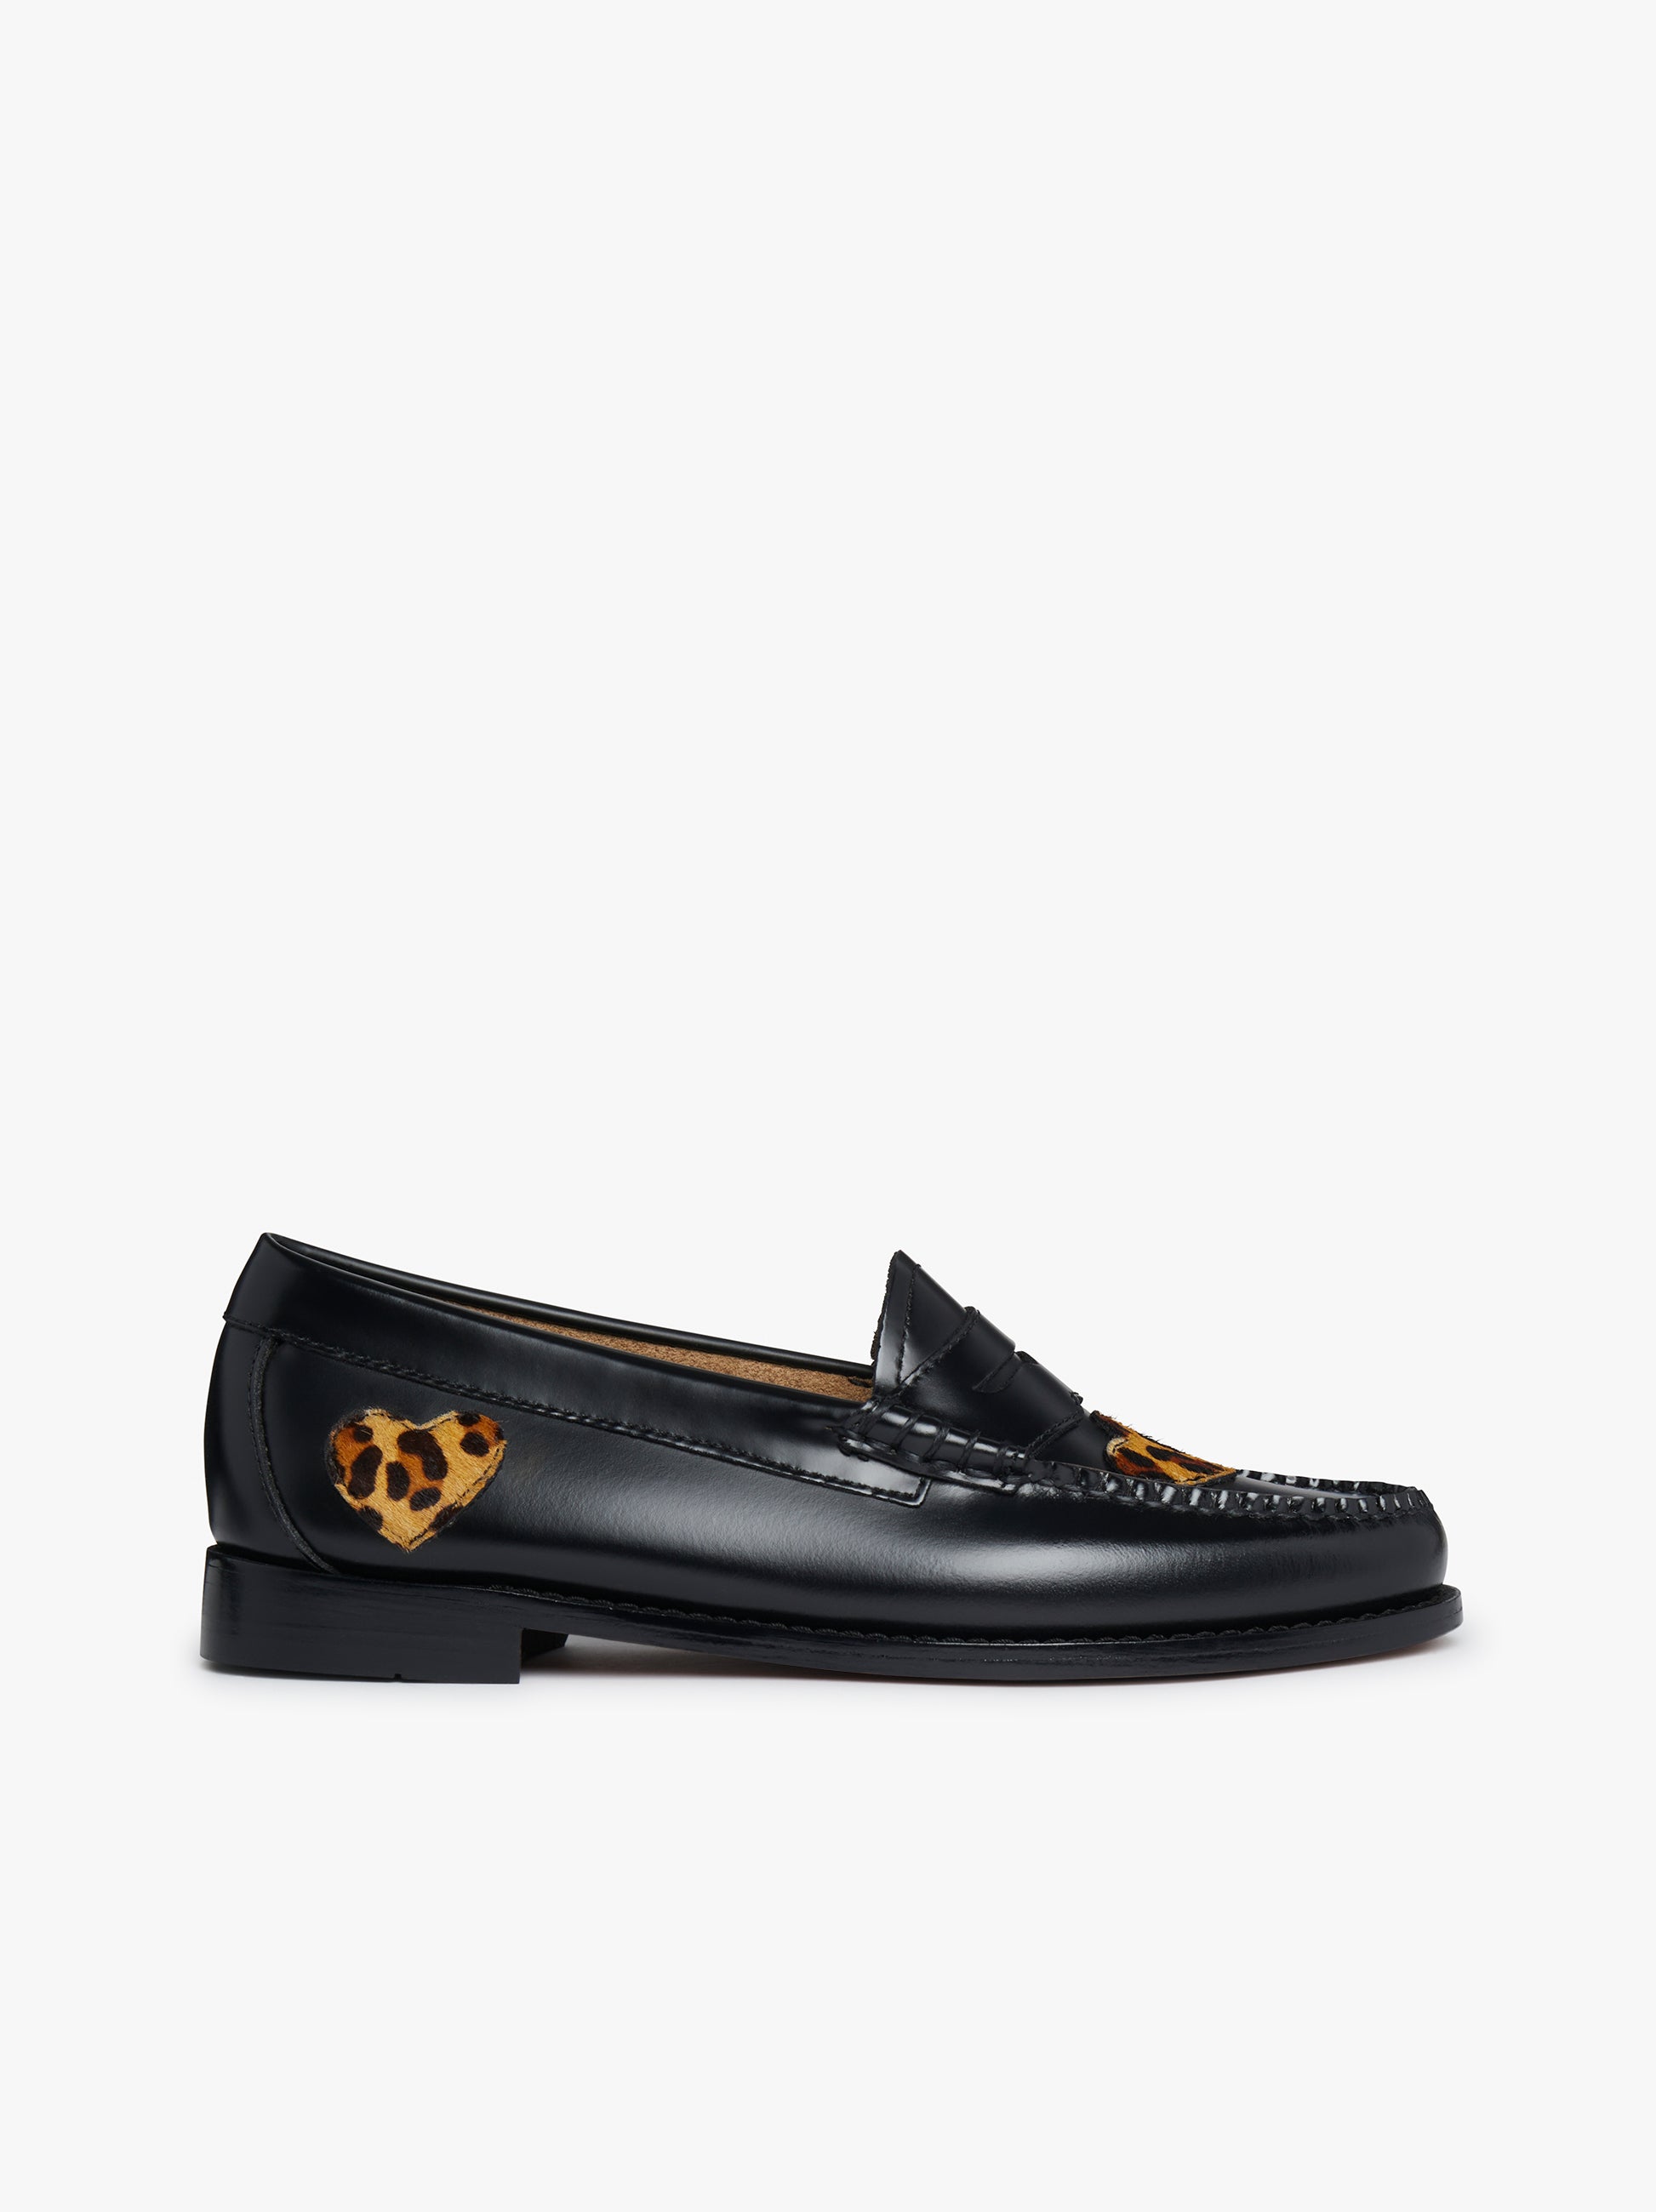 Leopard Print Leather Loafers | Leopard Print Penny Loafers – G.H.